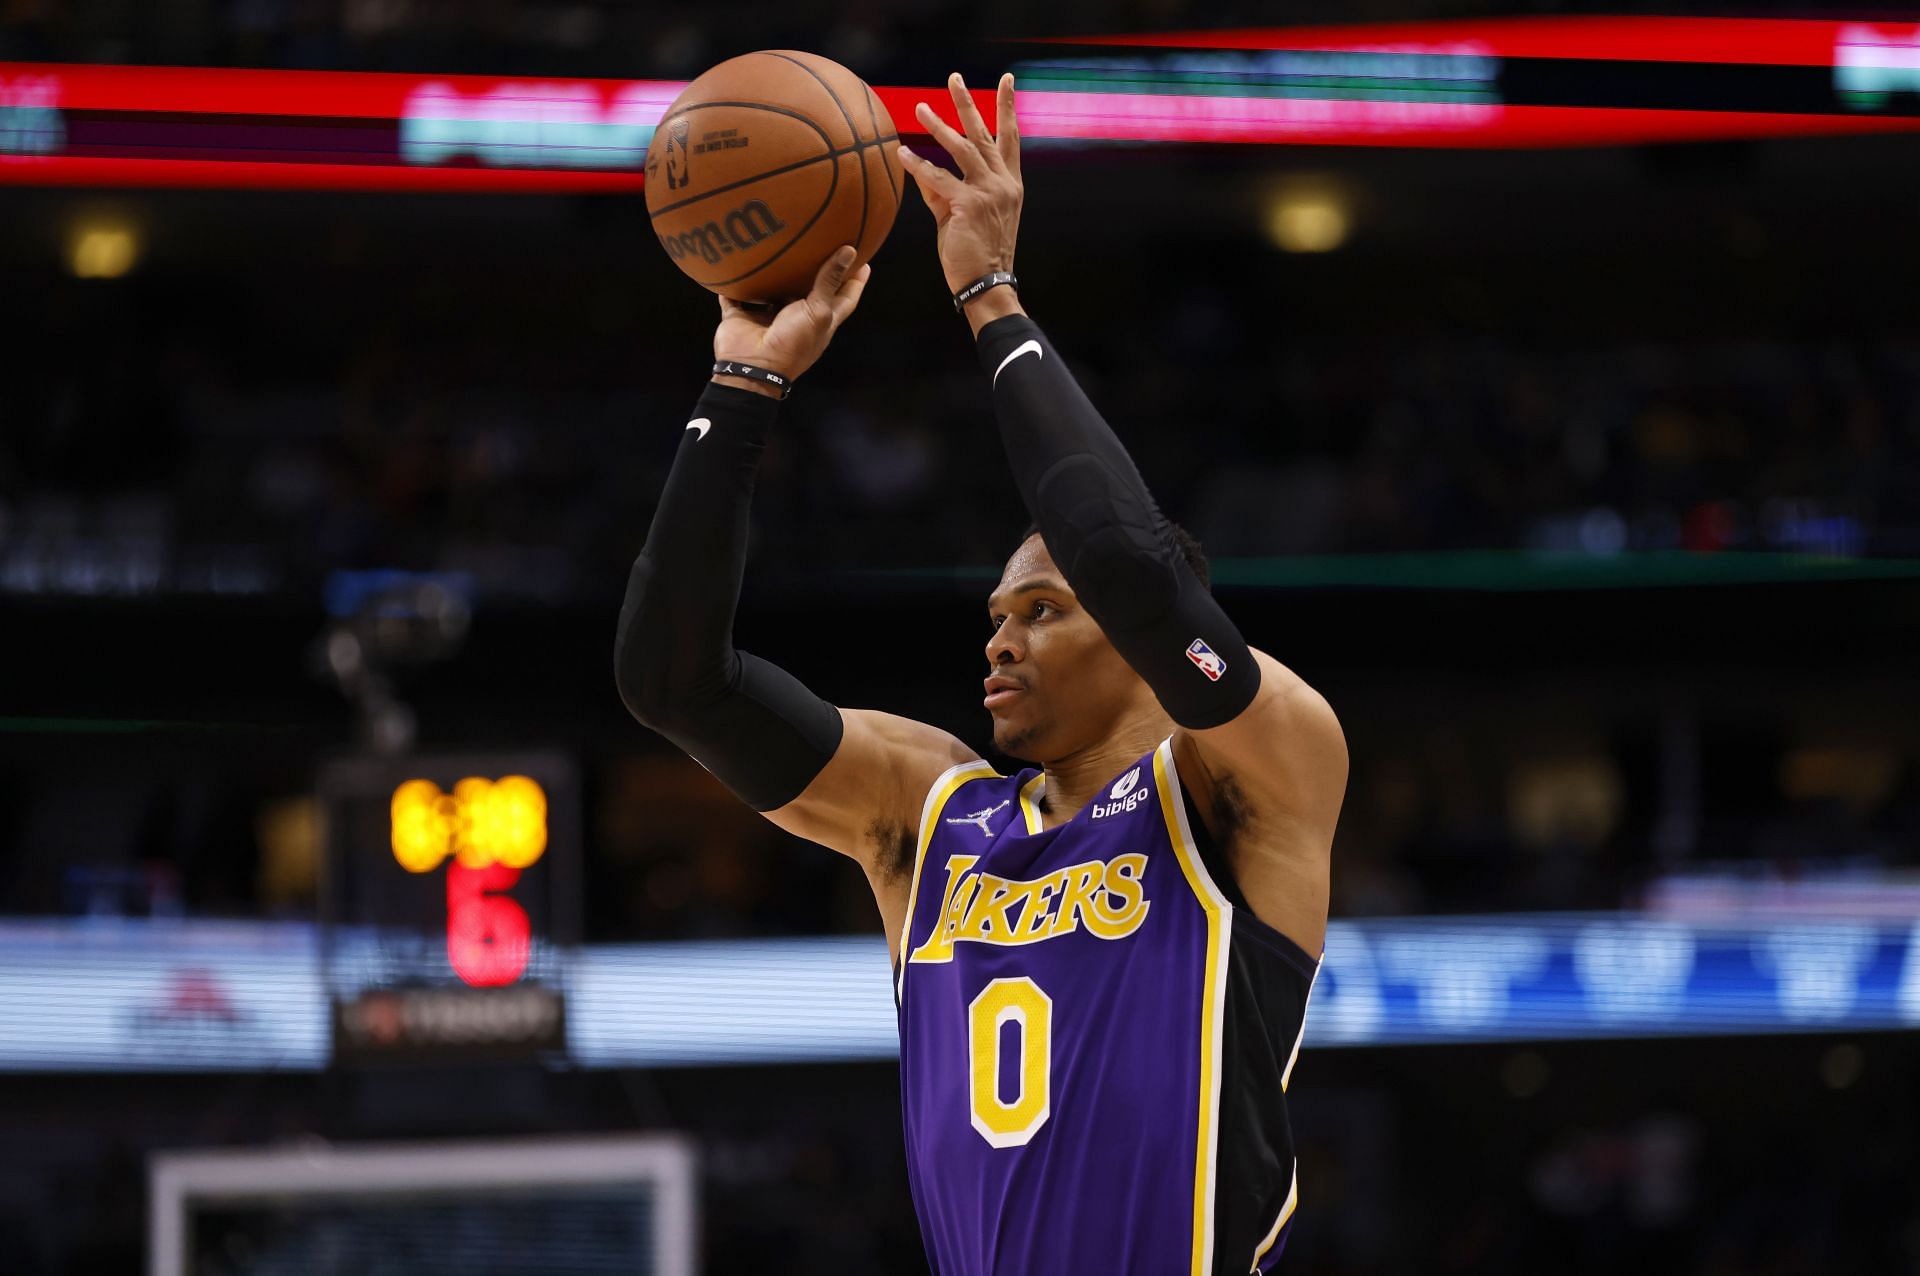 Russell Westbrook of the LA Lakers shoots a 3-pointer.